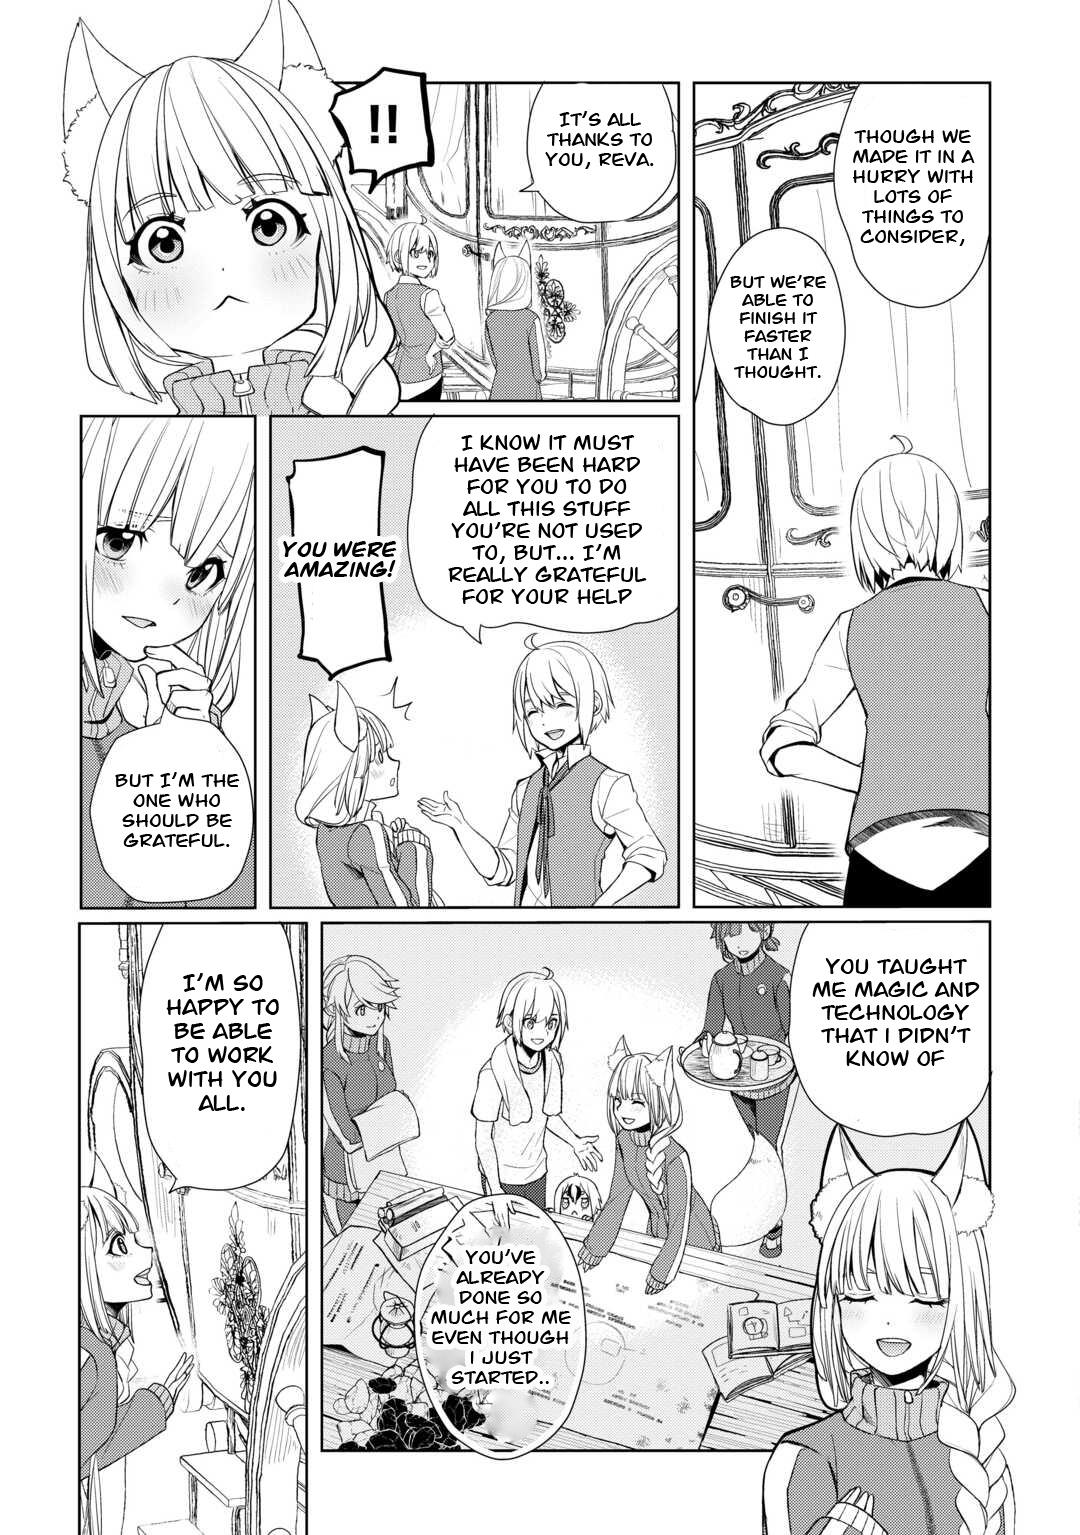 Someday Will I Be The Greatest Alchemist? - Page 3